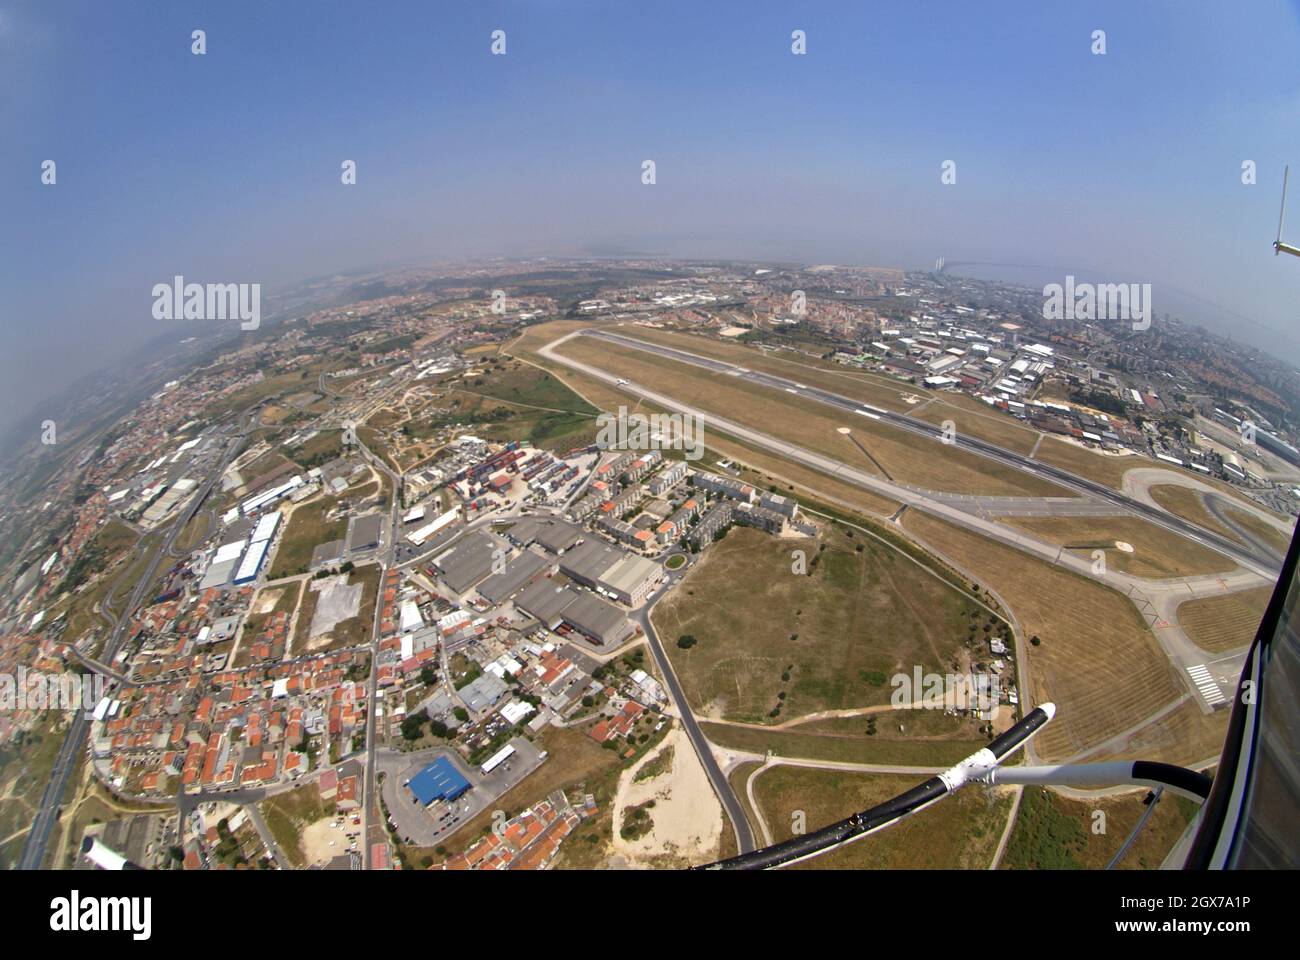 Aerial view of Lisbon from a helicopter with fish eye lens Stock Photo